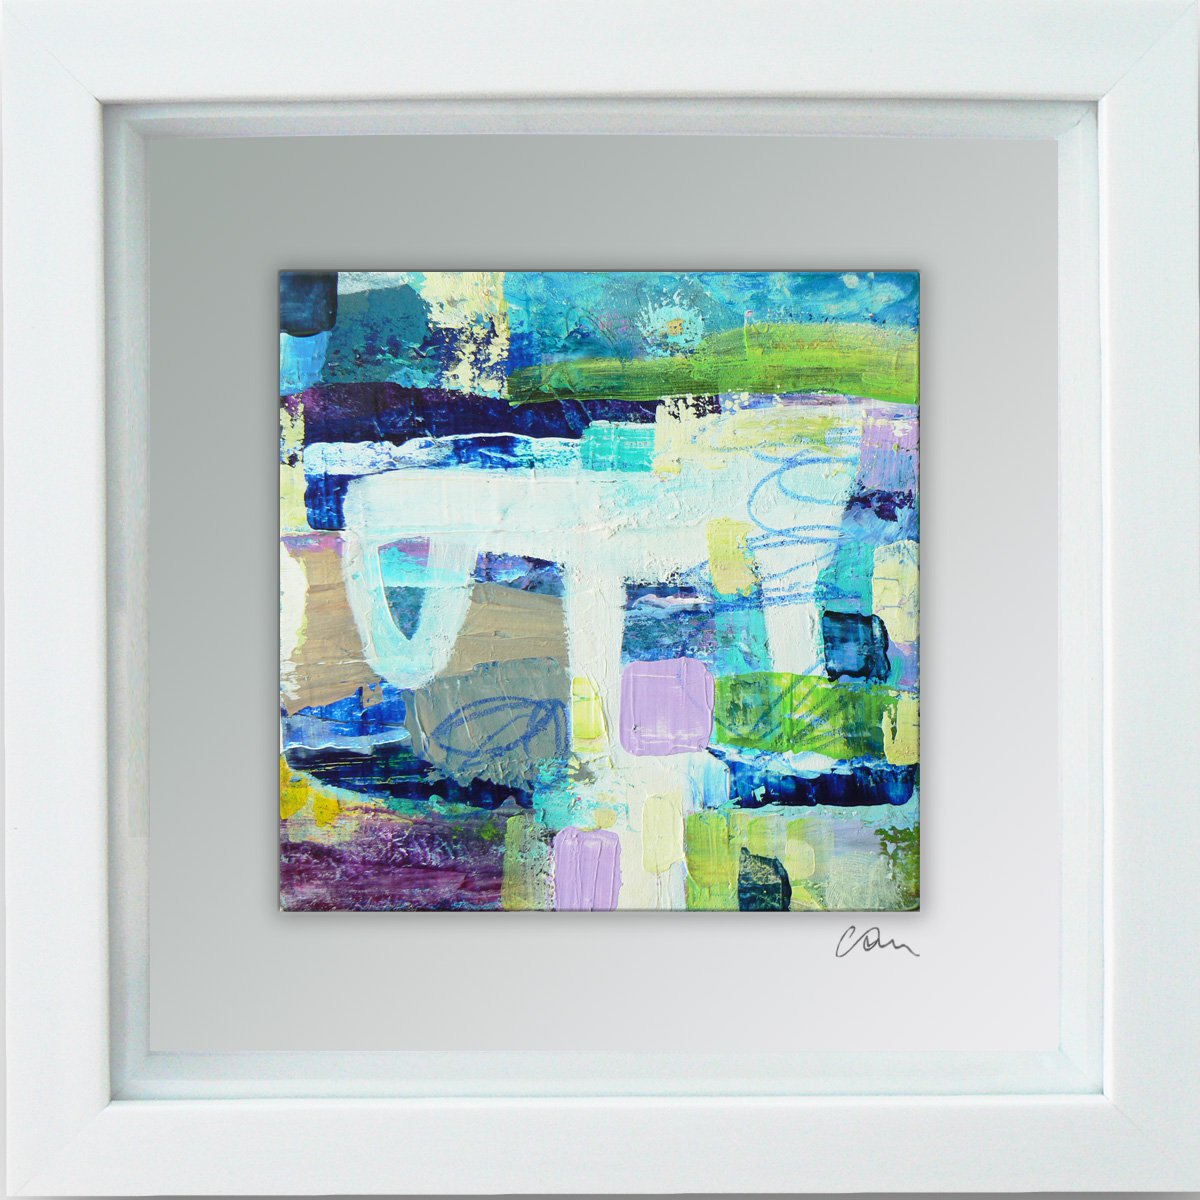 Framed ready to hang original abstract - Industry #1 by Carolynne Coulson